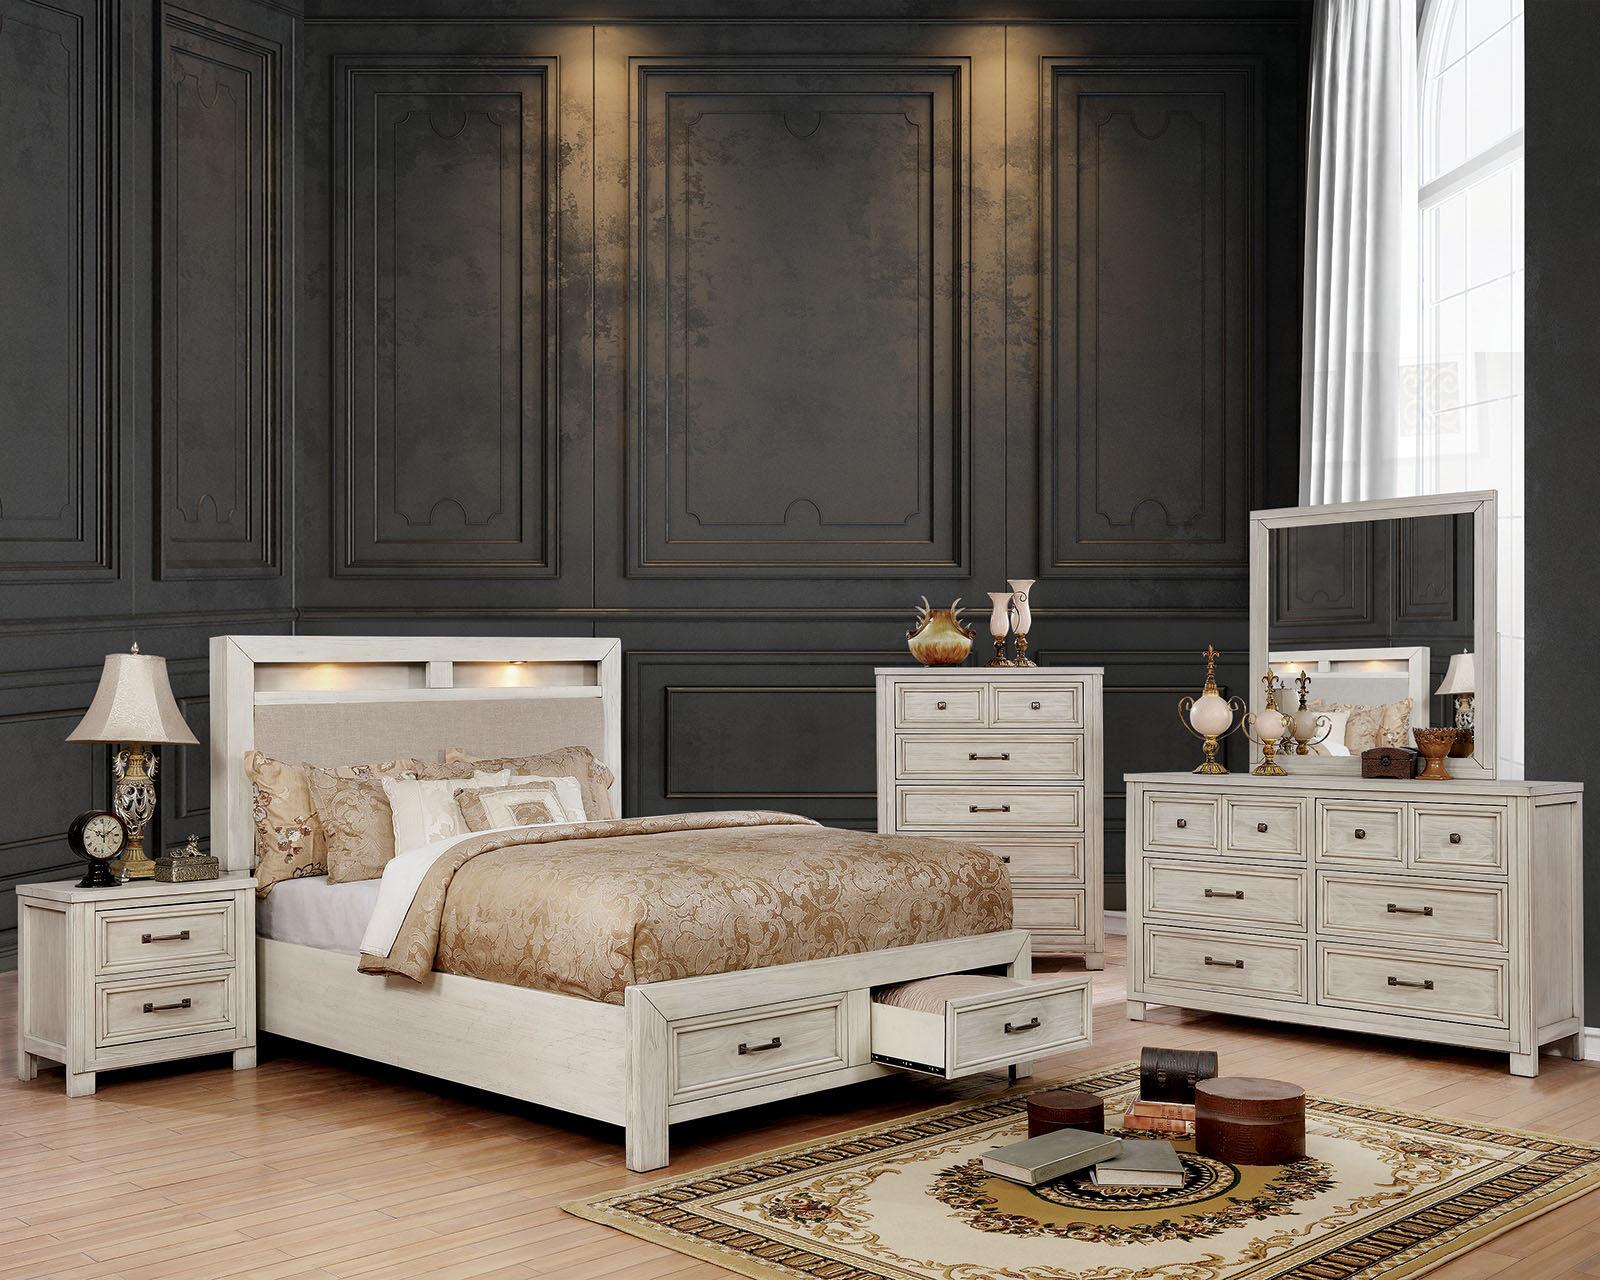 Transitional Storage Bedroom Set CM7365WH-CK-5PC Tywyn CM7365WH-CK-5PC in Antique White Fabric